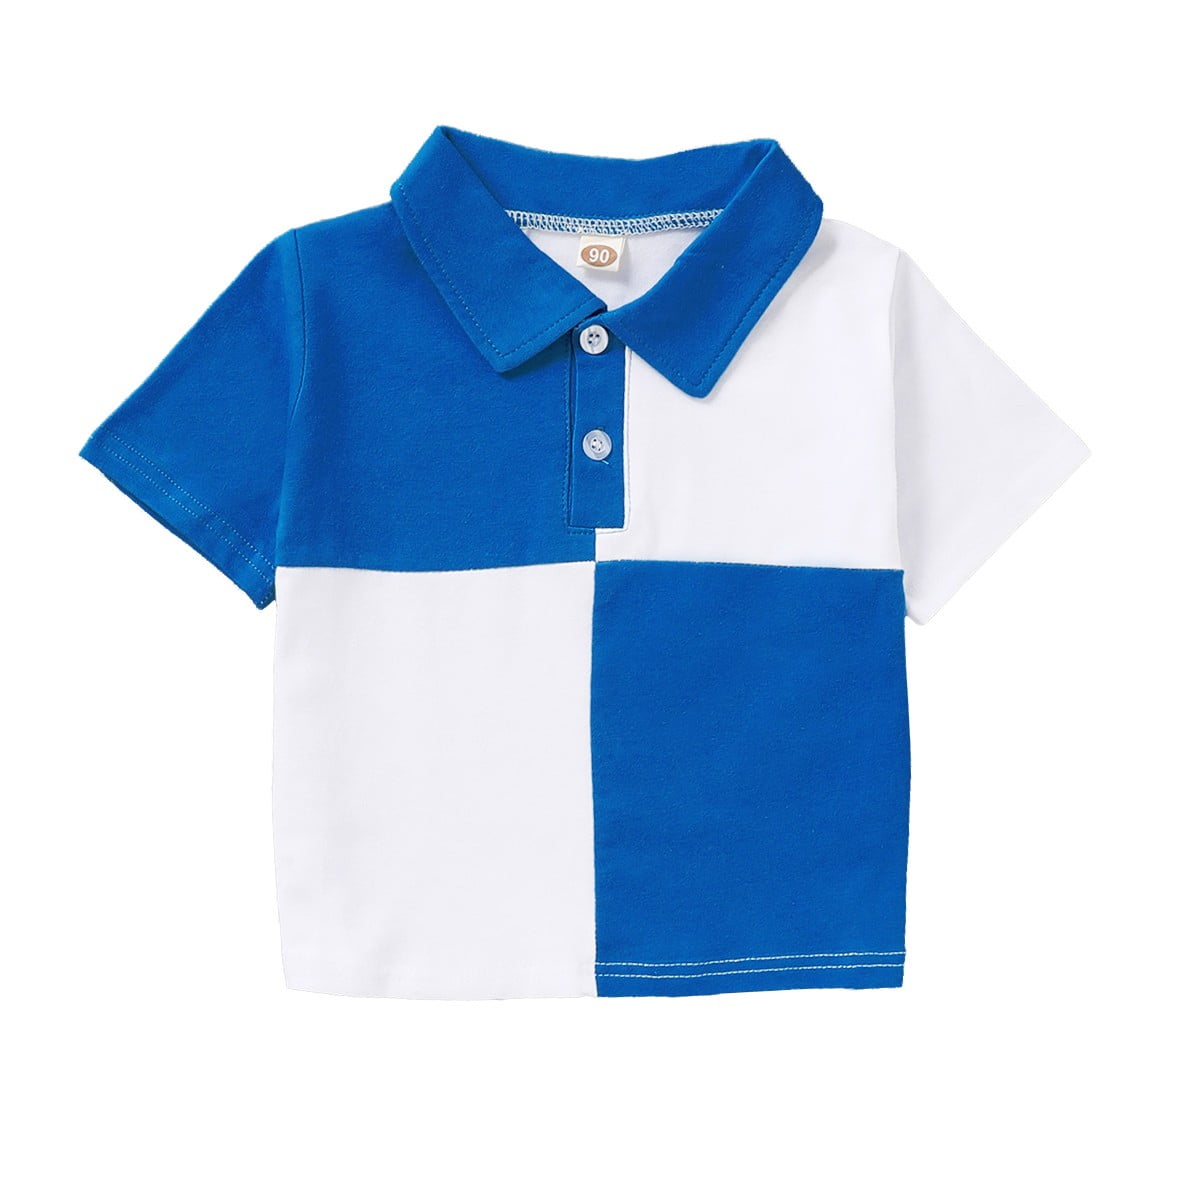 NEW Boys Polo Shirt Long Sleeved Top Ages 5-6 Years Blue Casual Cotton Rugby Top 